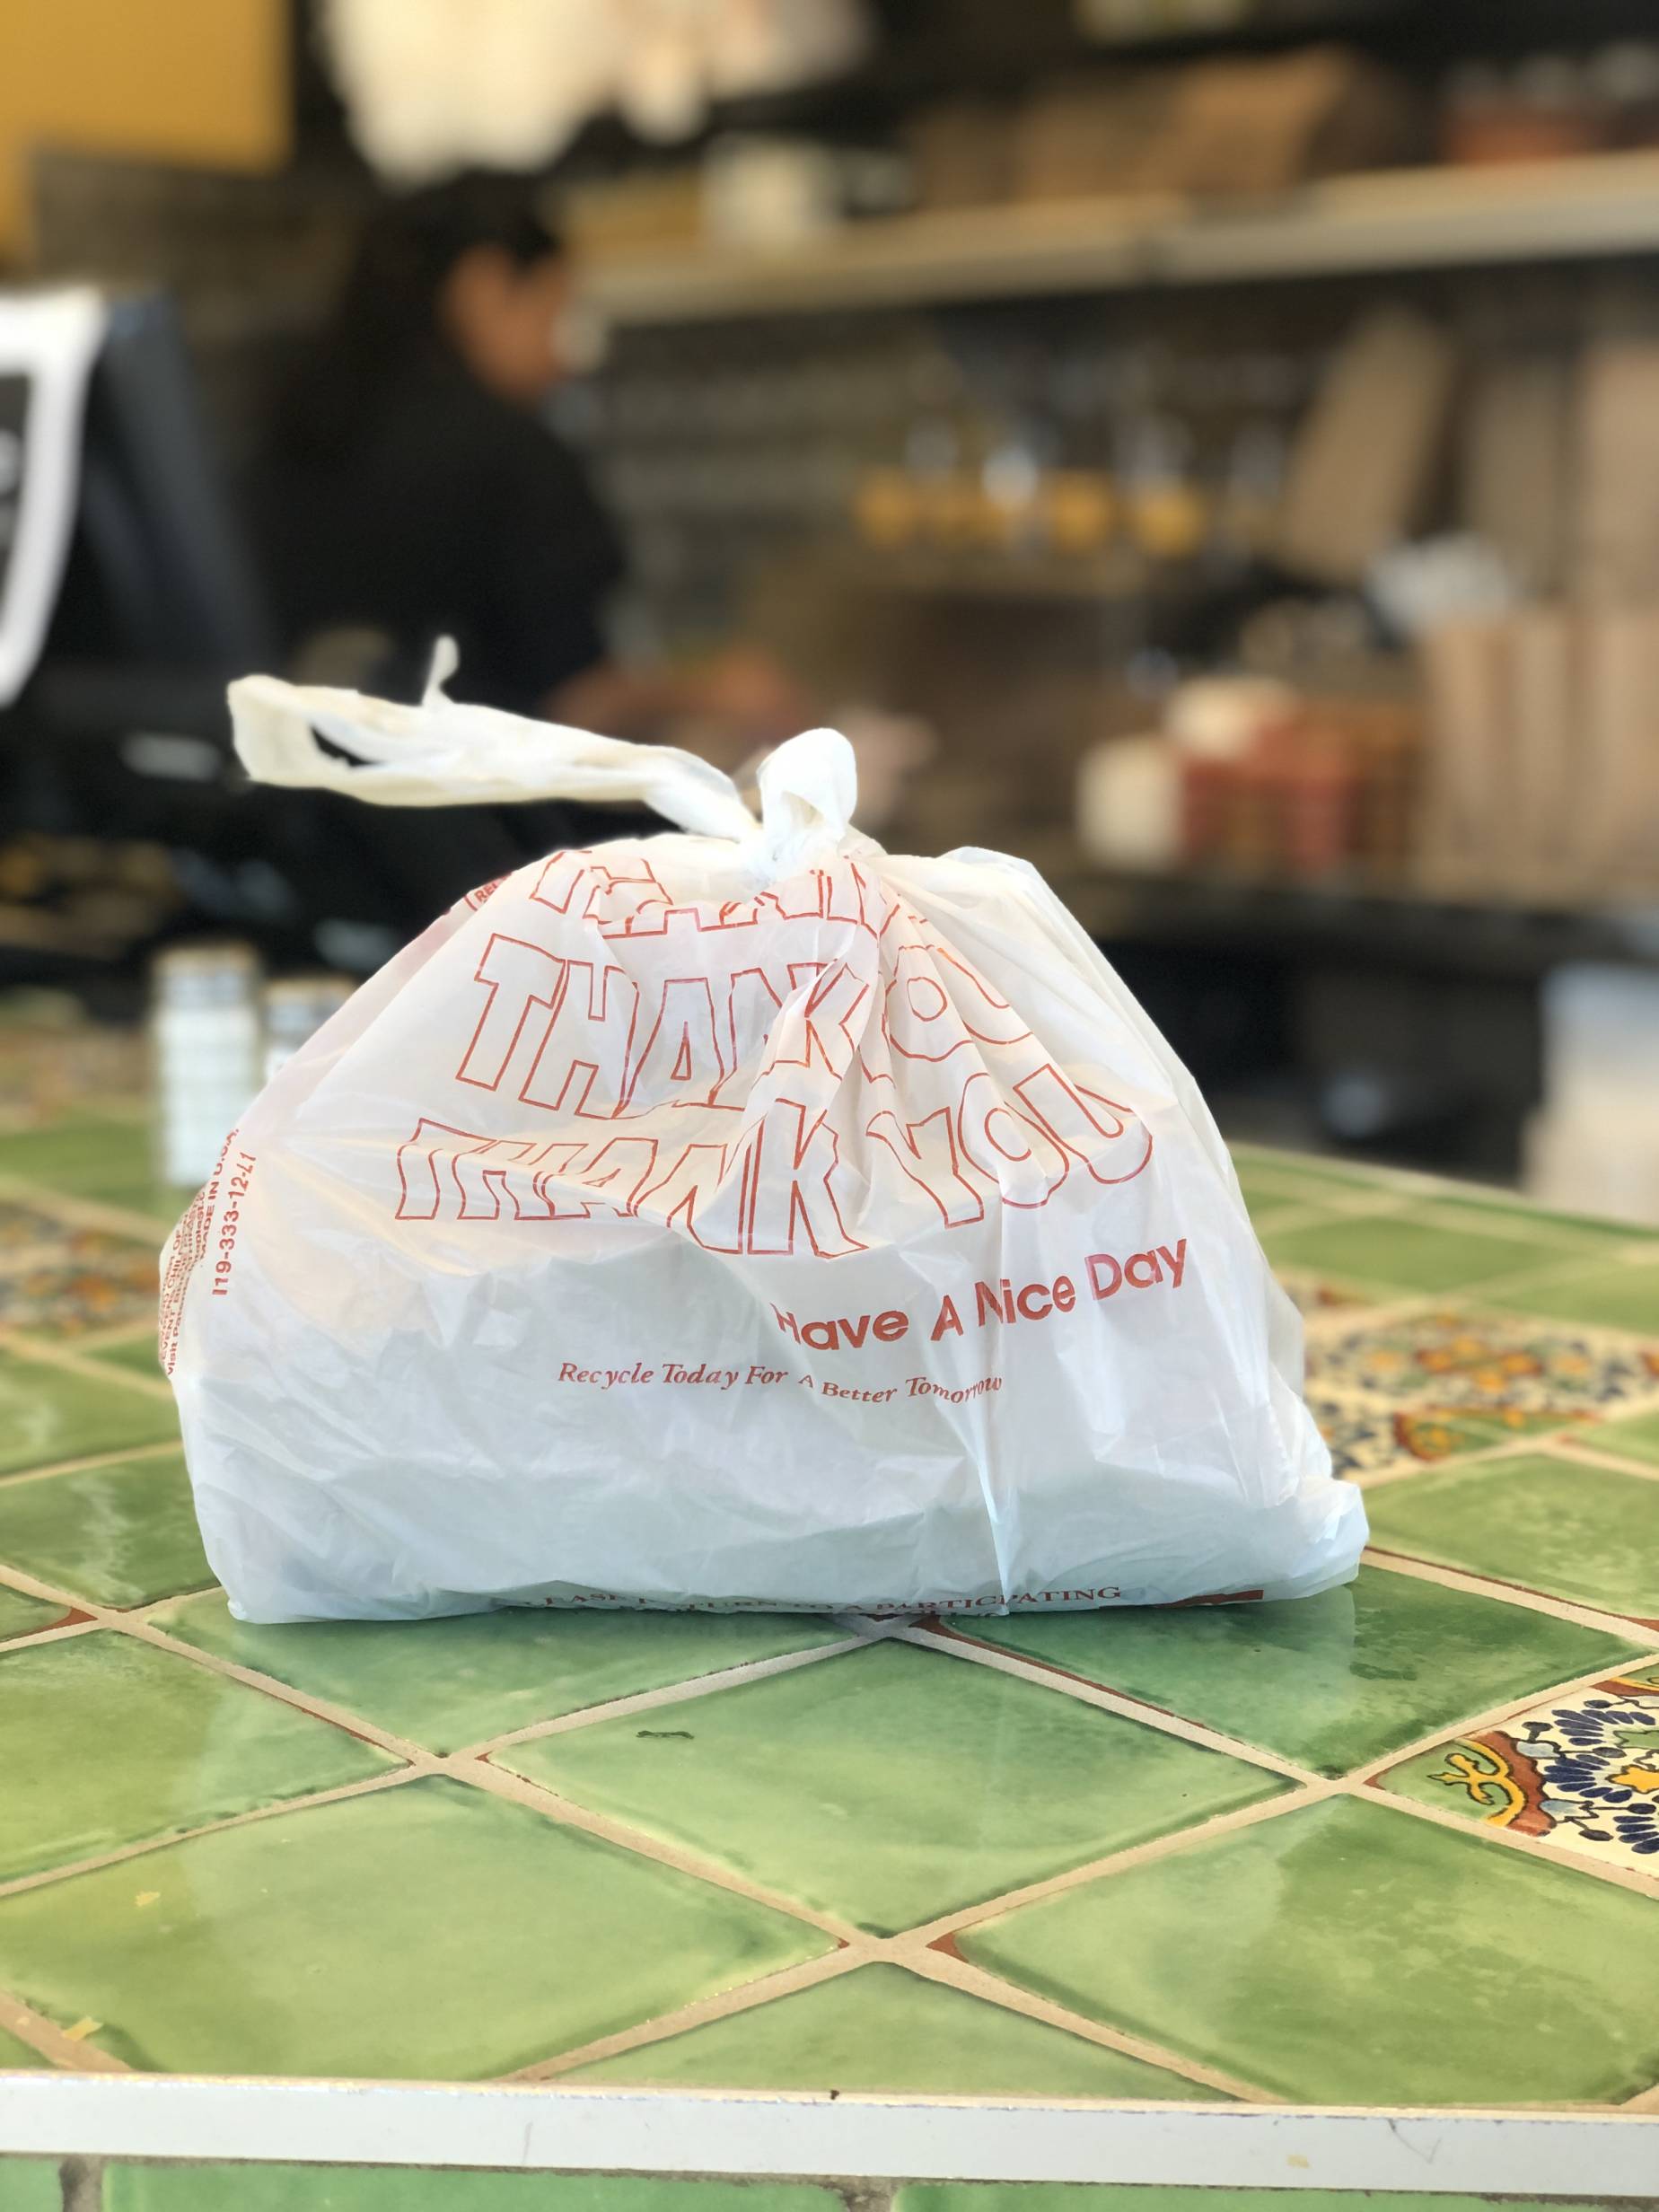 Where have you gotten takeout since Monday?